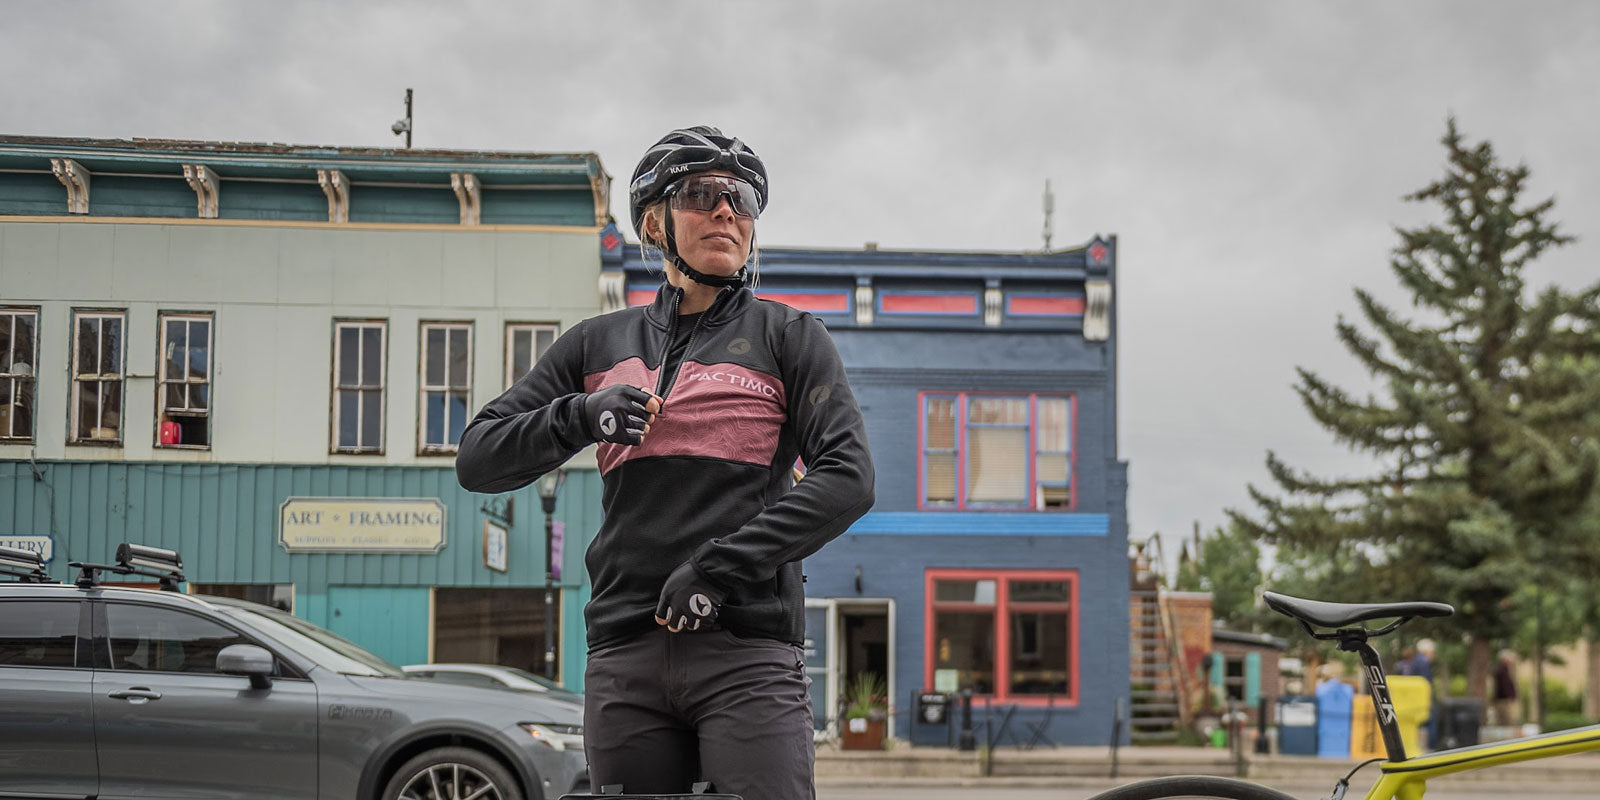 Women's Off Bike Clothing from Indy freelance